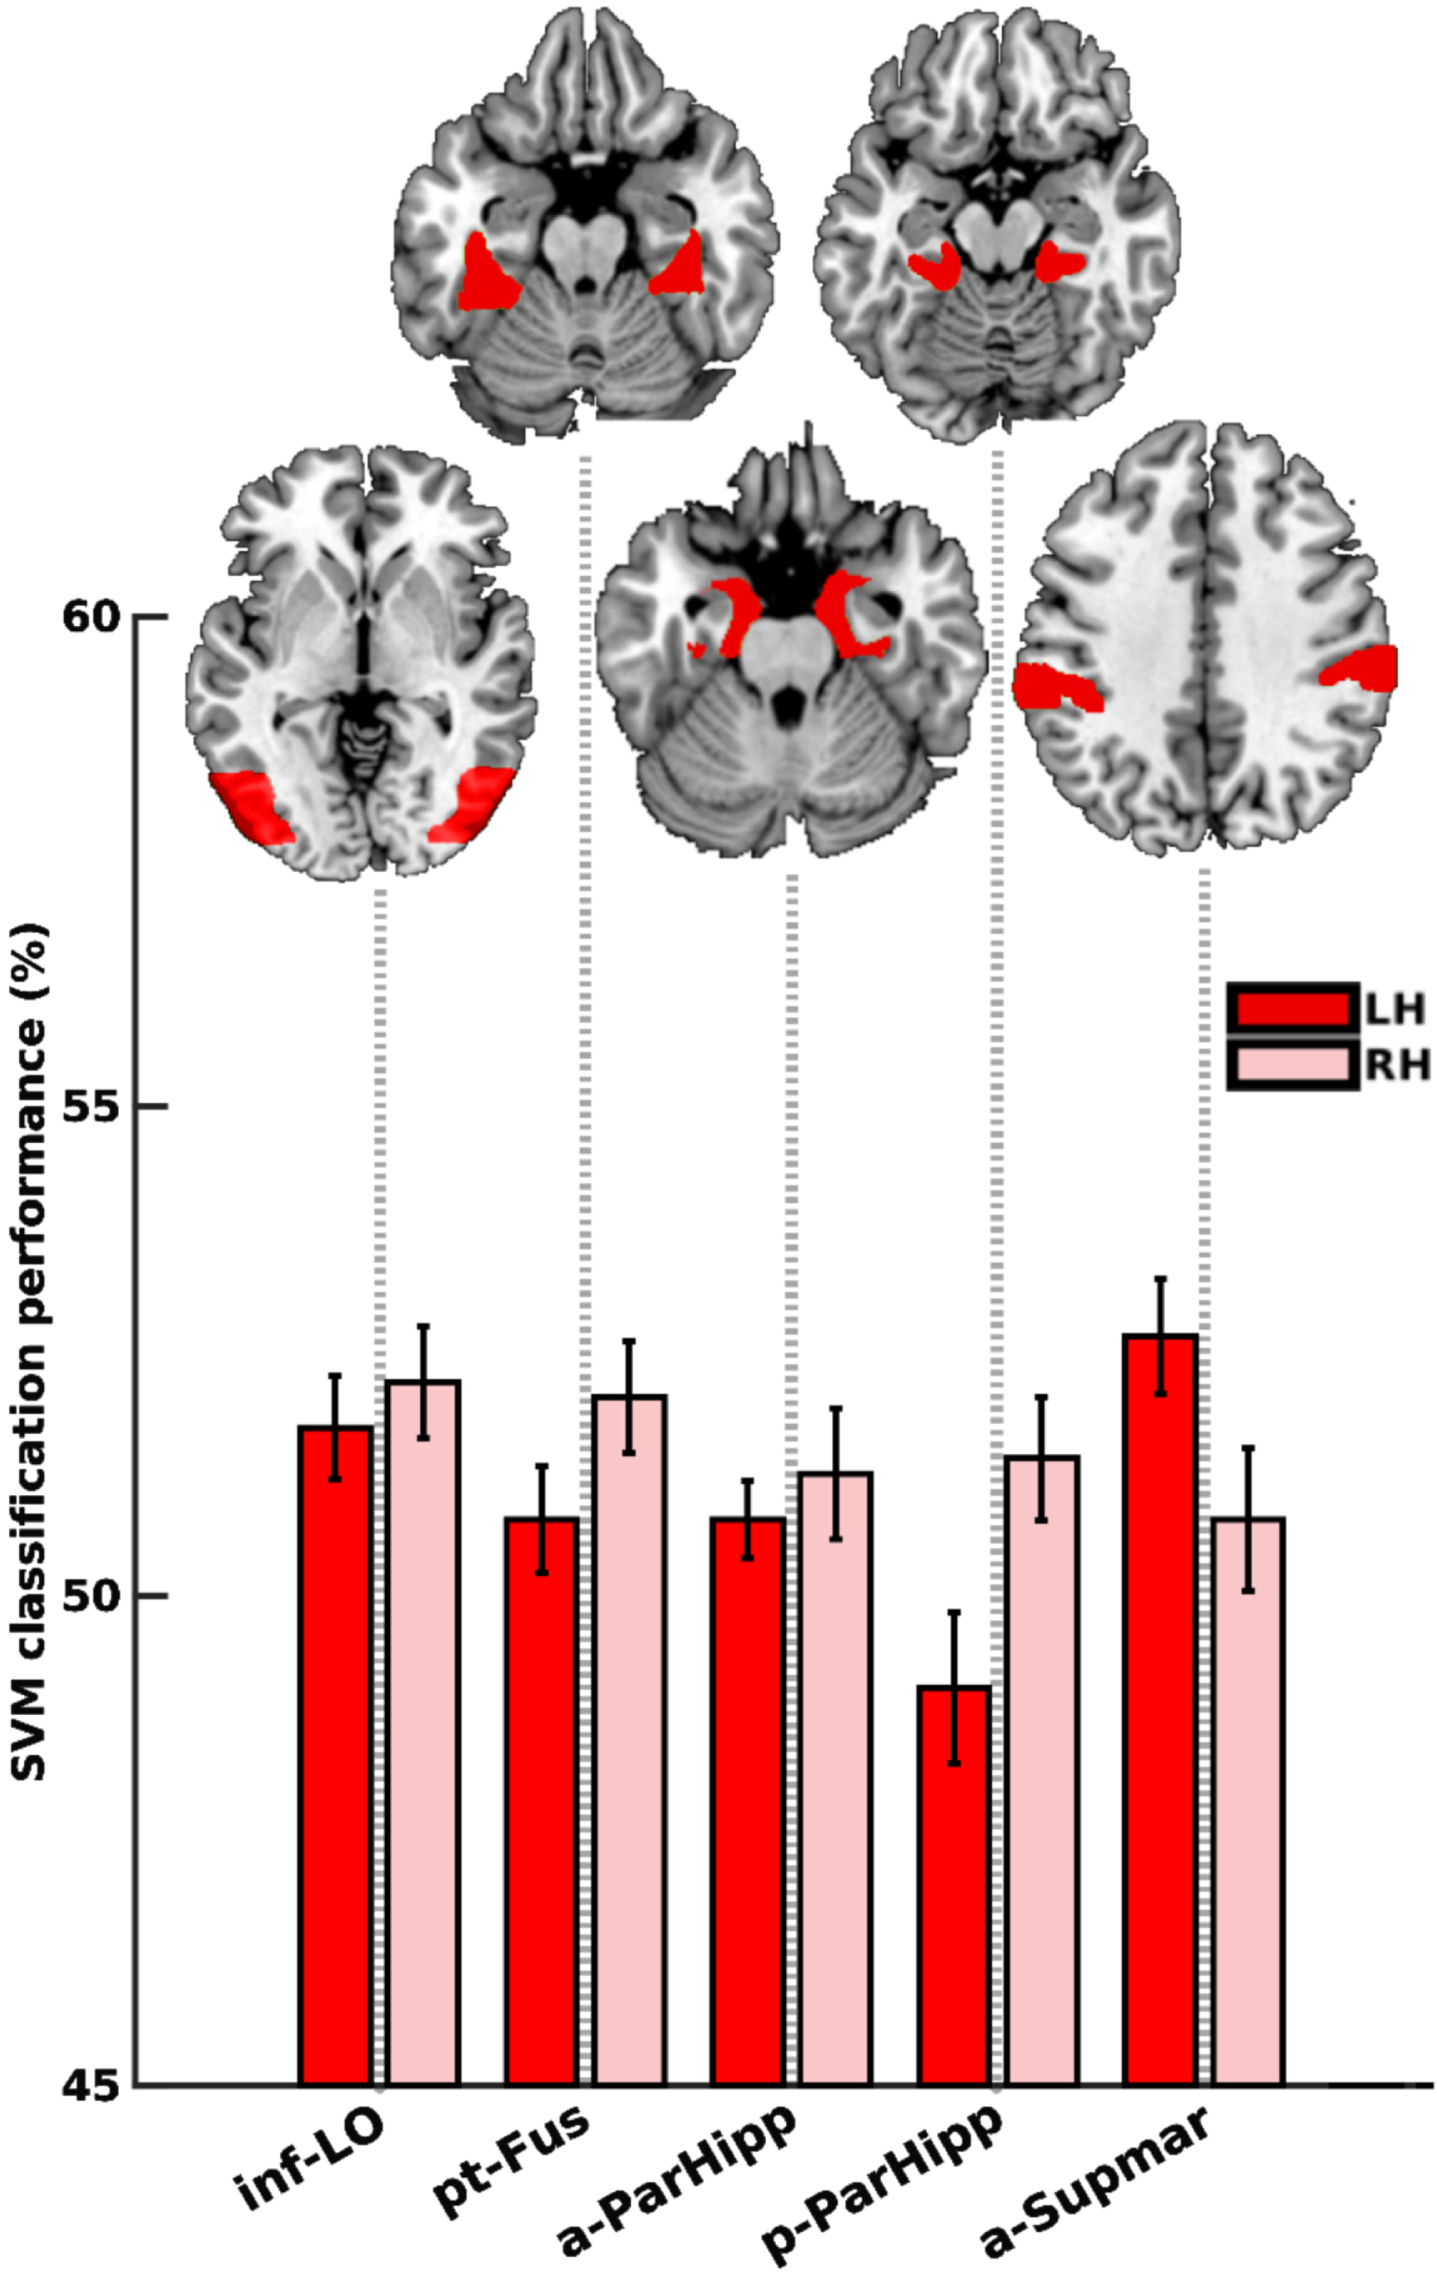 Animacy decoding in the mild AD group. Dark and light red bars represent the left and right hemispheres, respectively. No region remained significant following FDR correction. inf-LO, lateral occipital cortex, inferior division; pt-Fus, temporal fusiform cortex, posterior division; a-ParaHipp, parahippocampal gyrus, anterior division; p-ParaHipp, parahippocampal gyrus, posterior division; a-Supmar, supramarginal gyrus, anterior division.